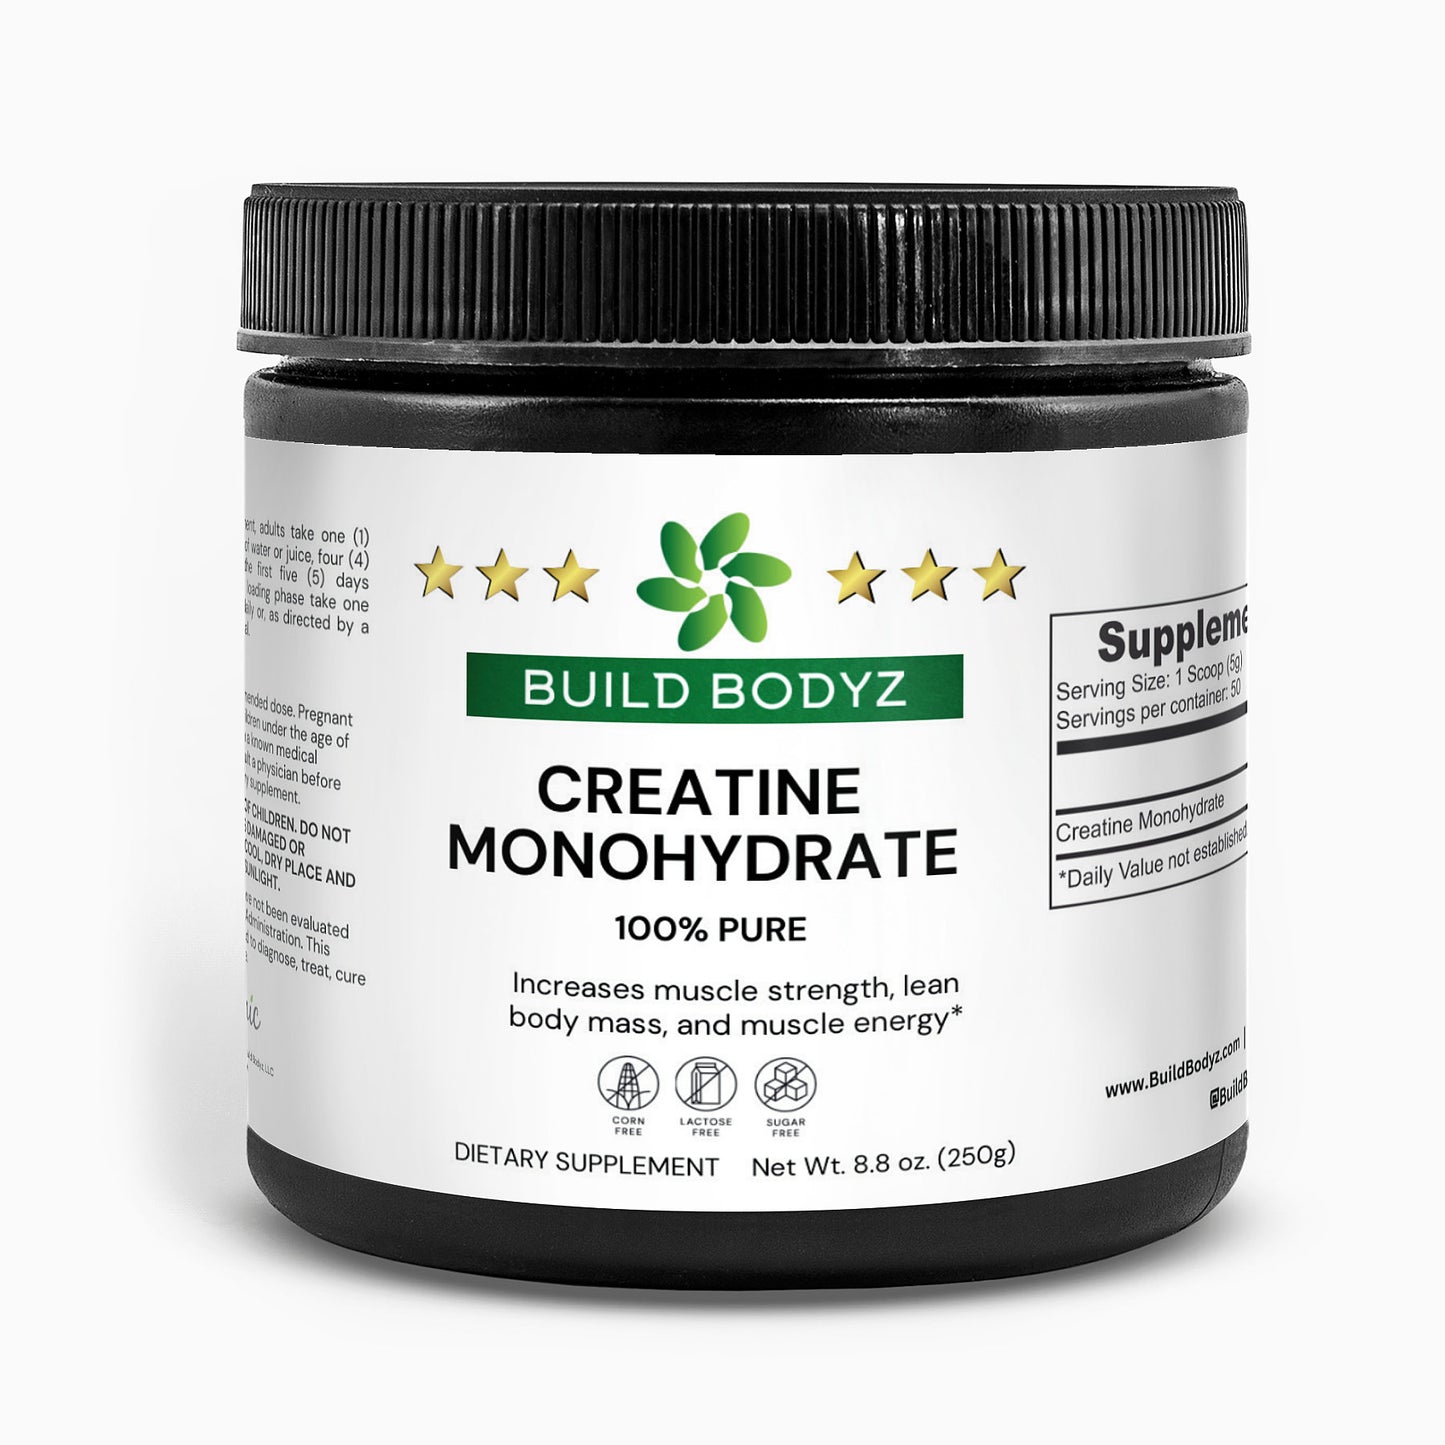 Premium Creatine Monohydrate (8.8 oz) - Boost Exercise Performance and Muscle Growth